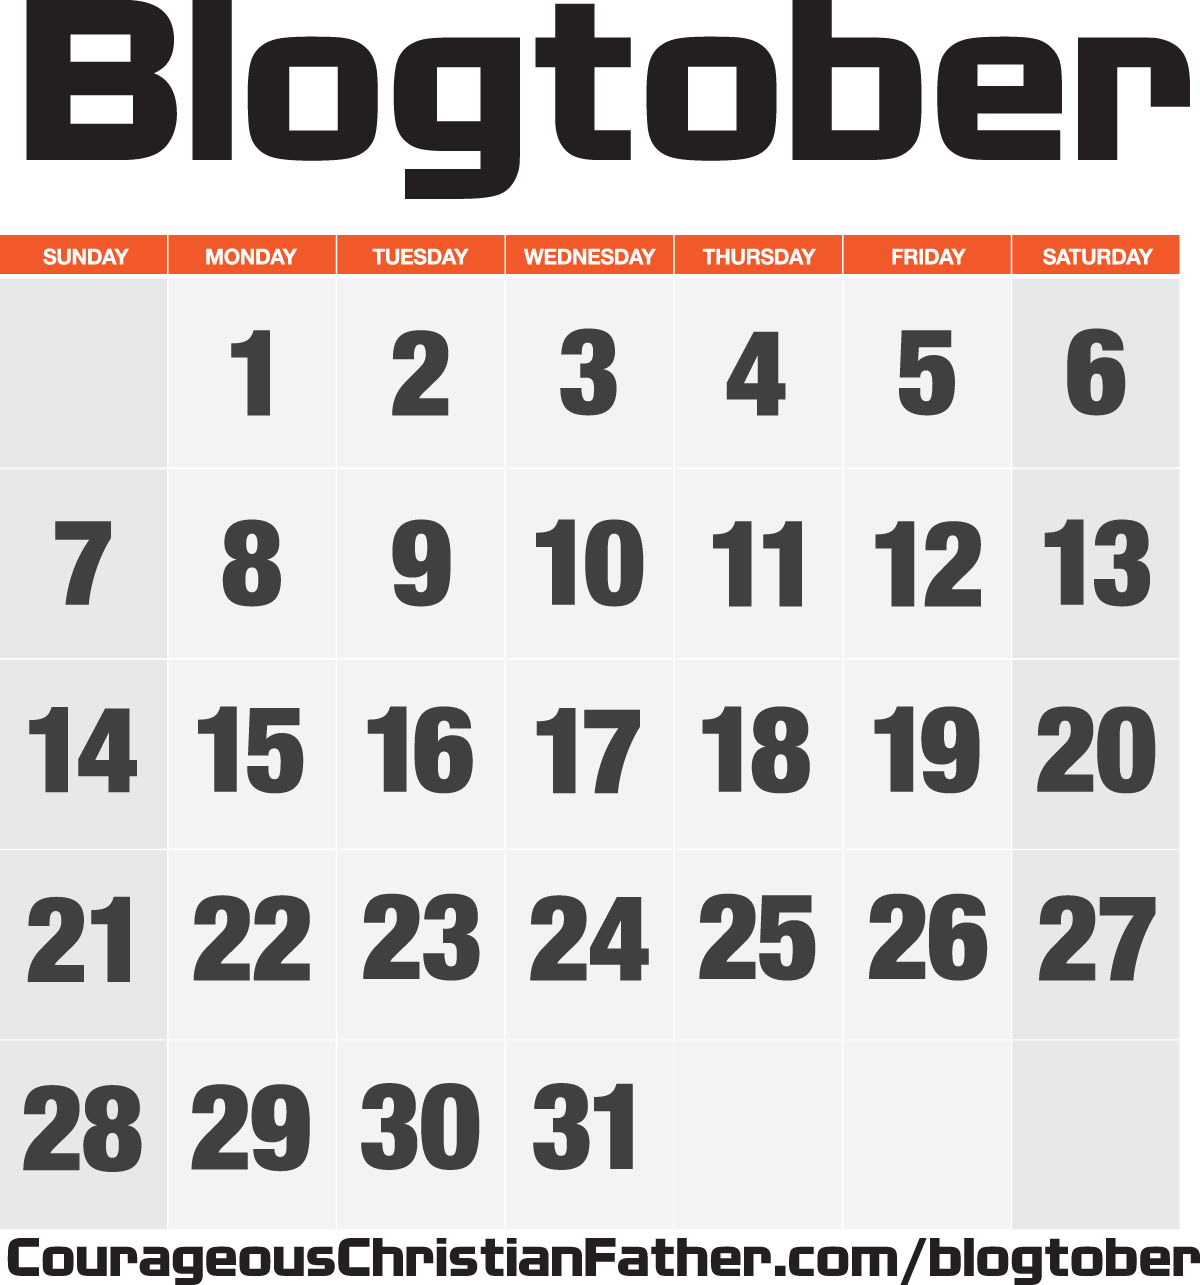 Blogtober a time to get blogging! Come on all you Christian Bloggers and Blog for the LORD! #Blogtober